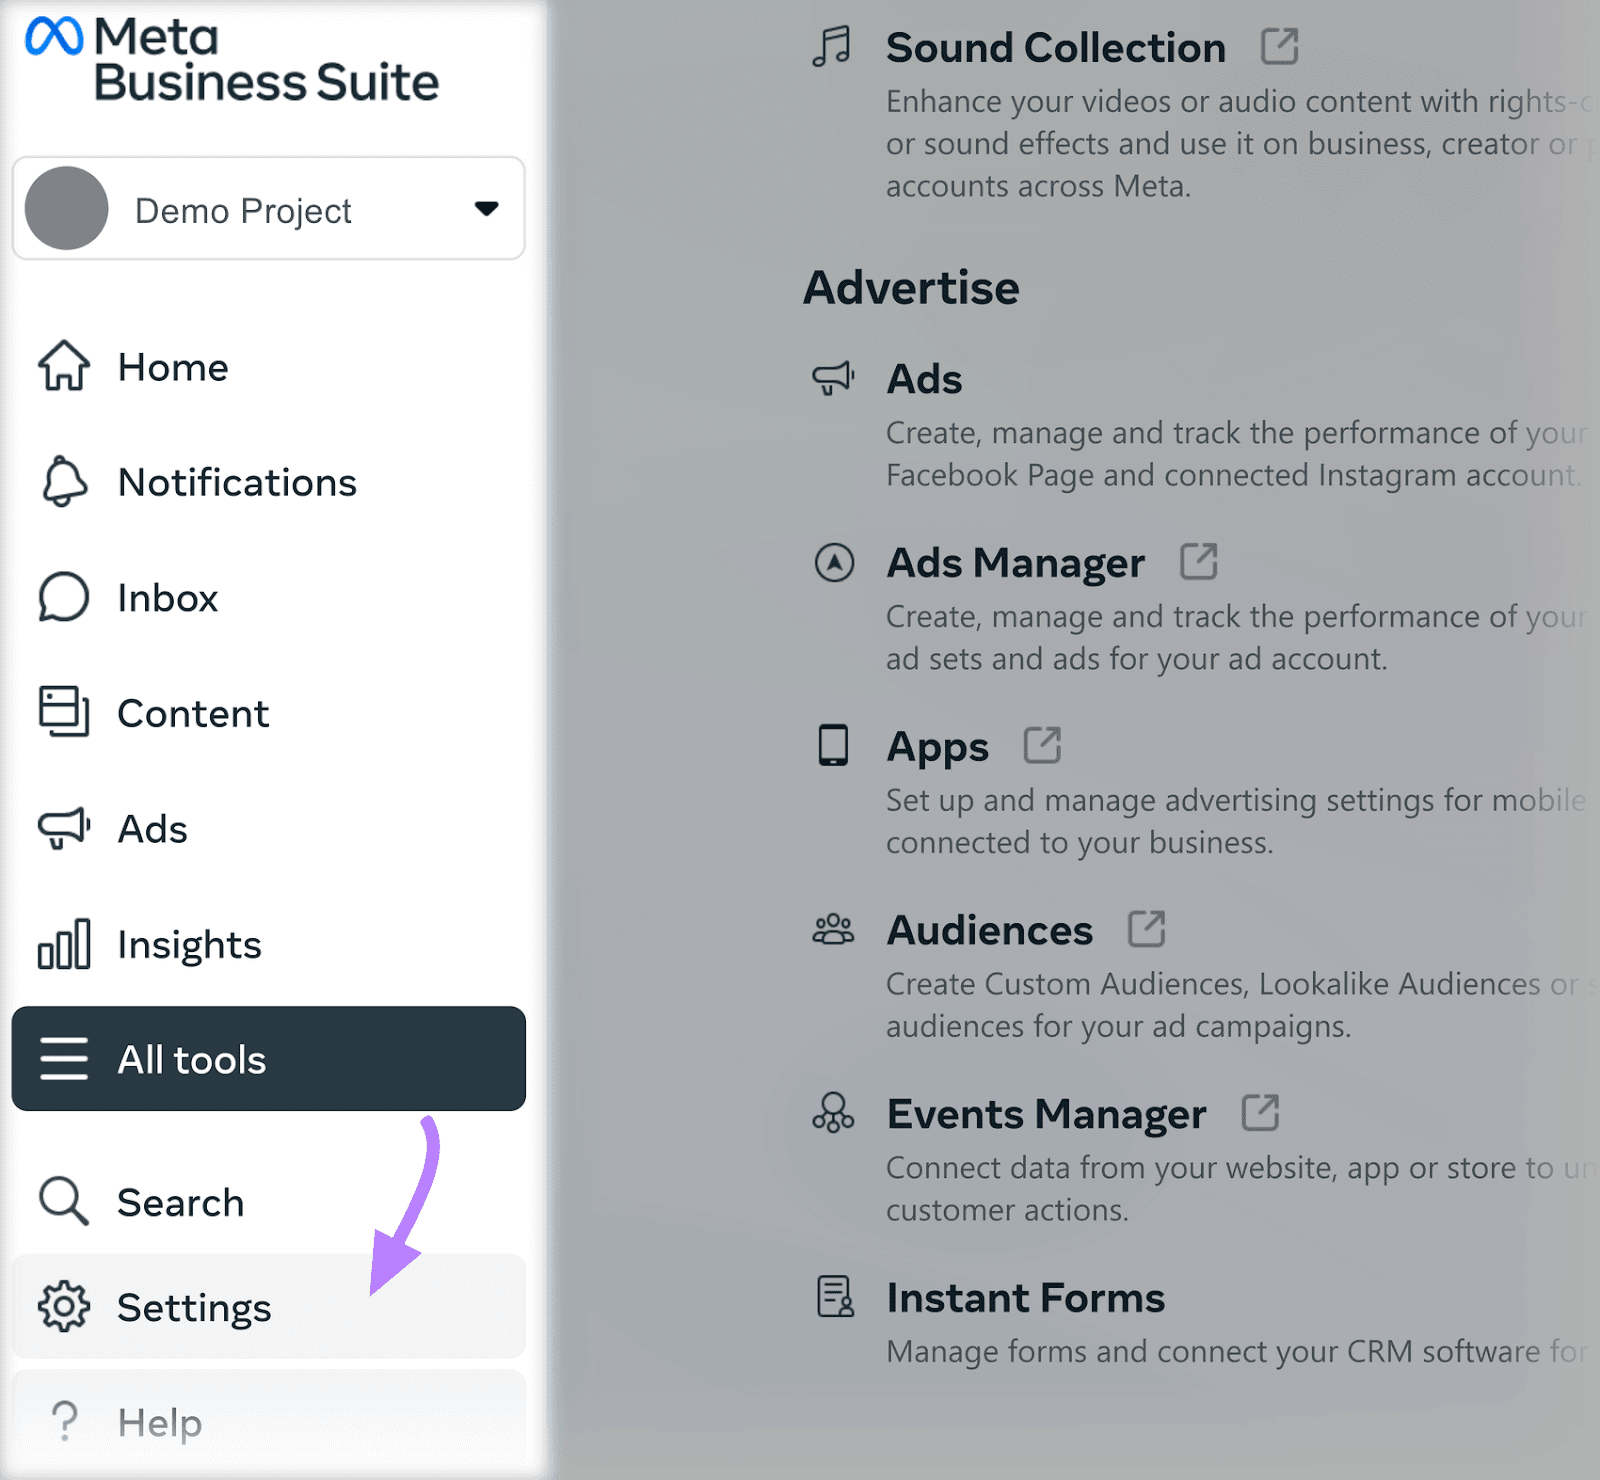 “Settings" button selected from the Meta Business Suite menu